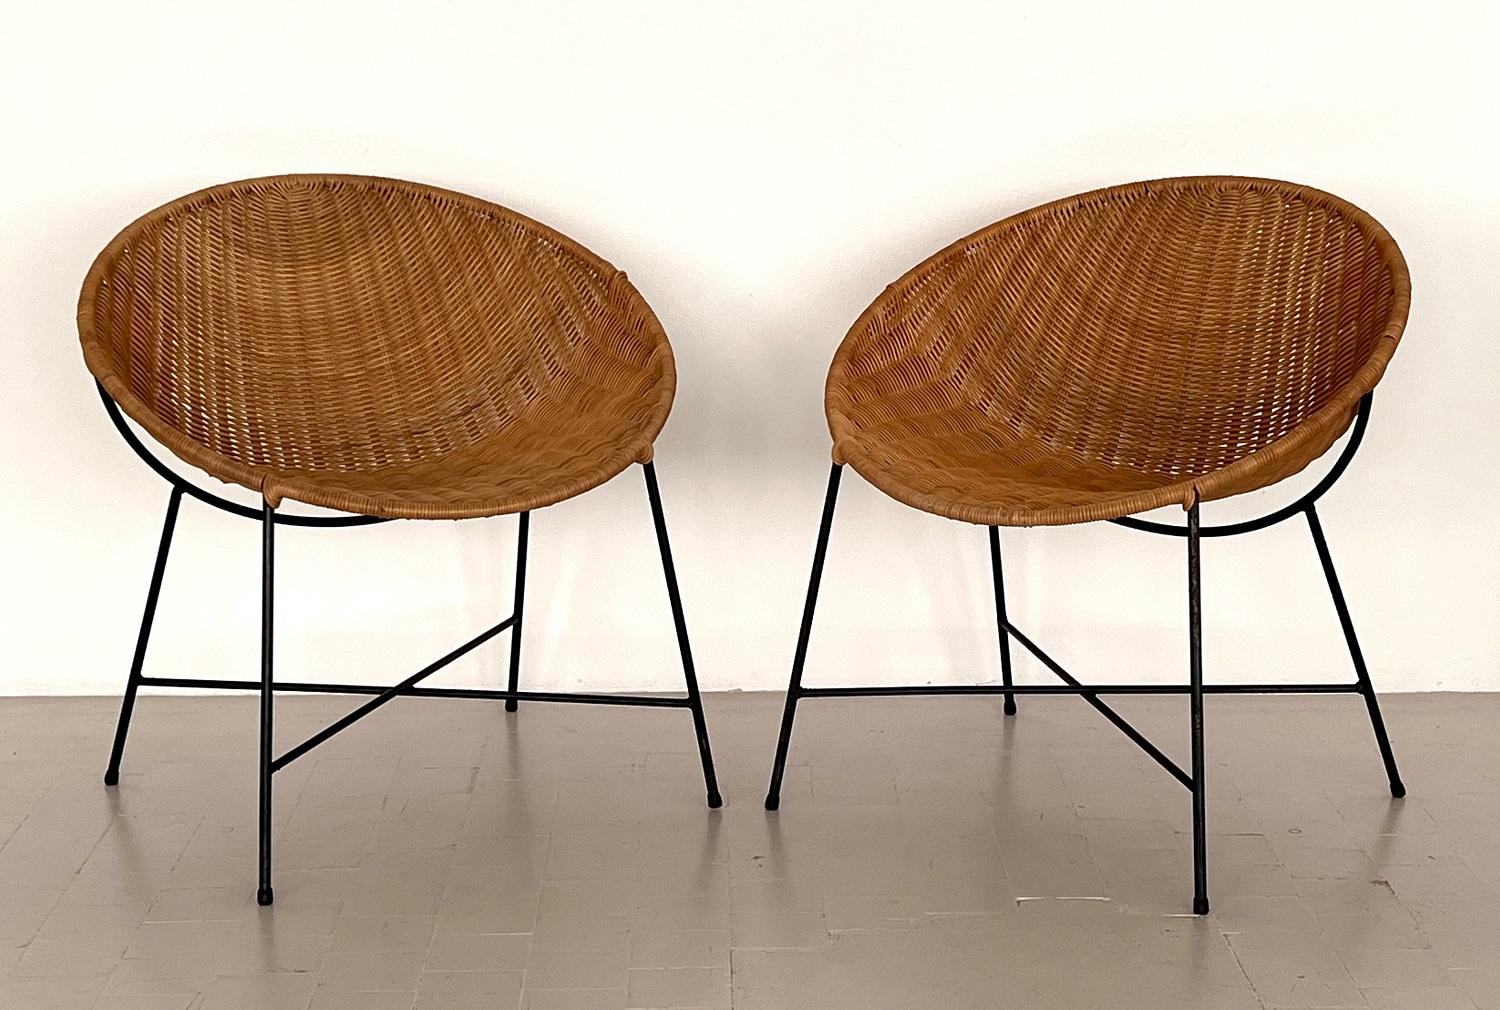 Pair of Mid-Century Rattan Lounge Chairs, 1970s For Sale 8